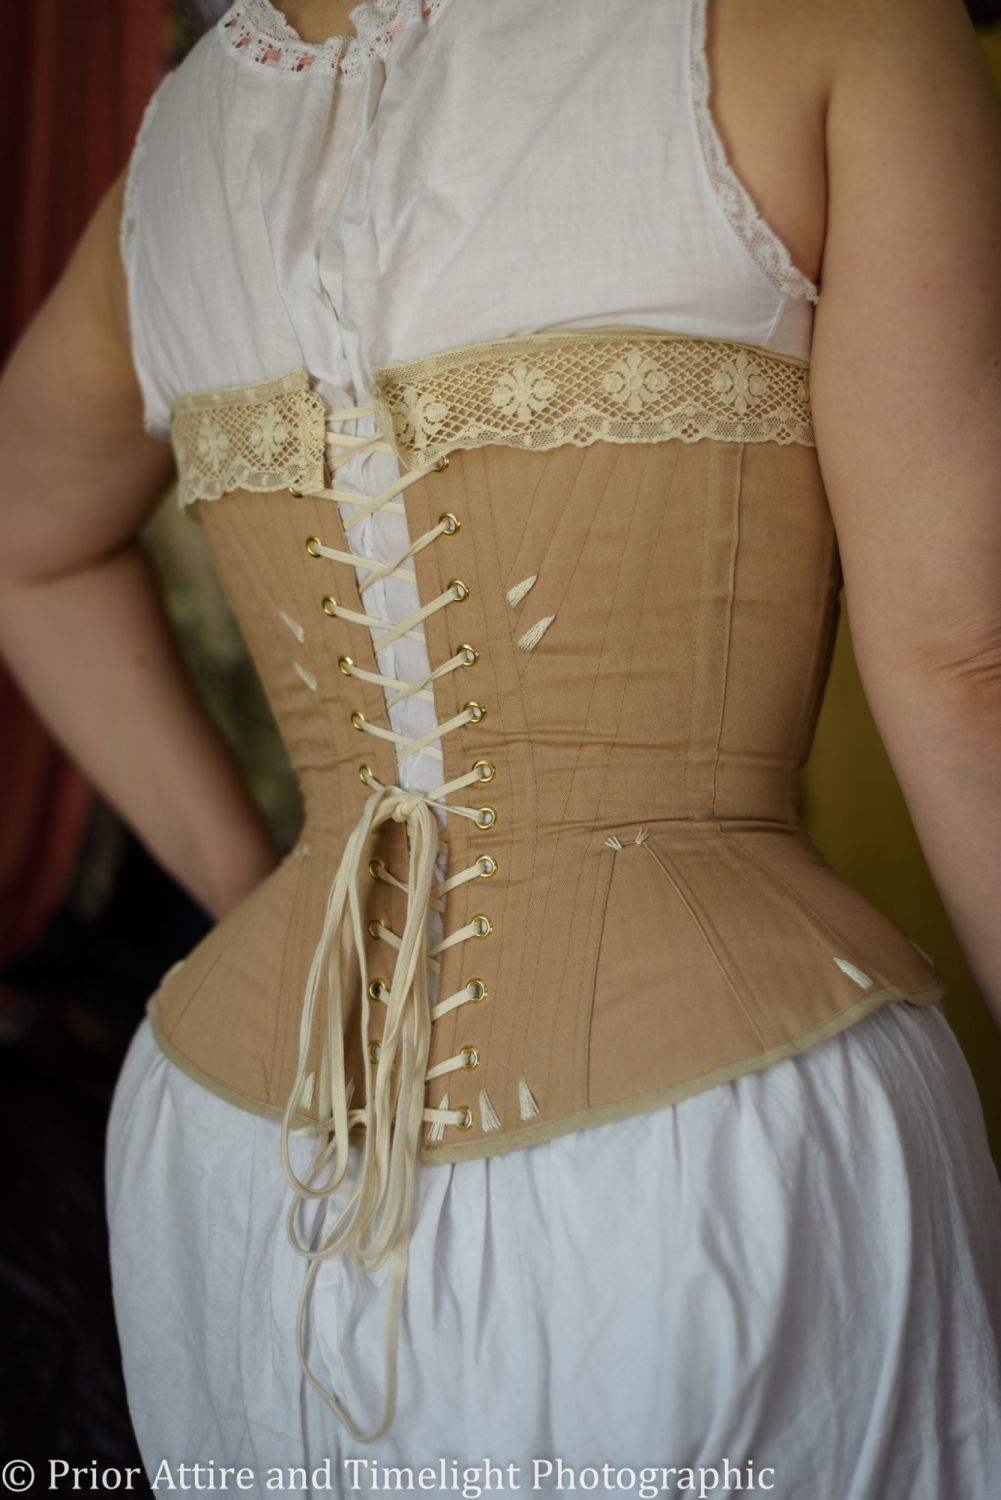 Corset Brands by Price Range – Lucy's Corsetry